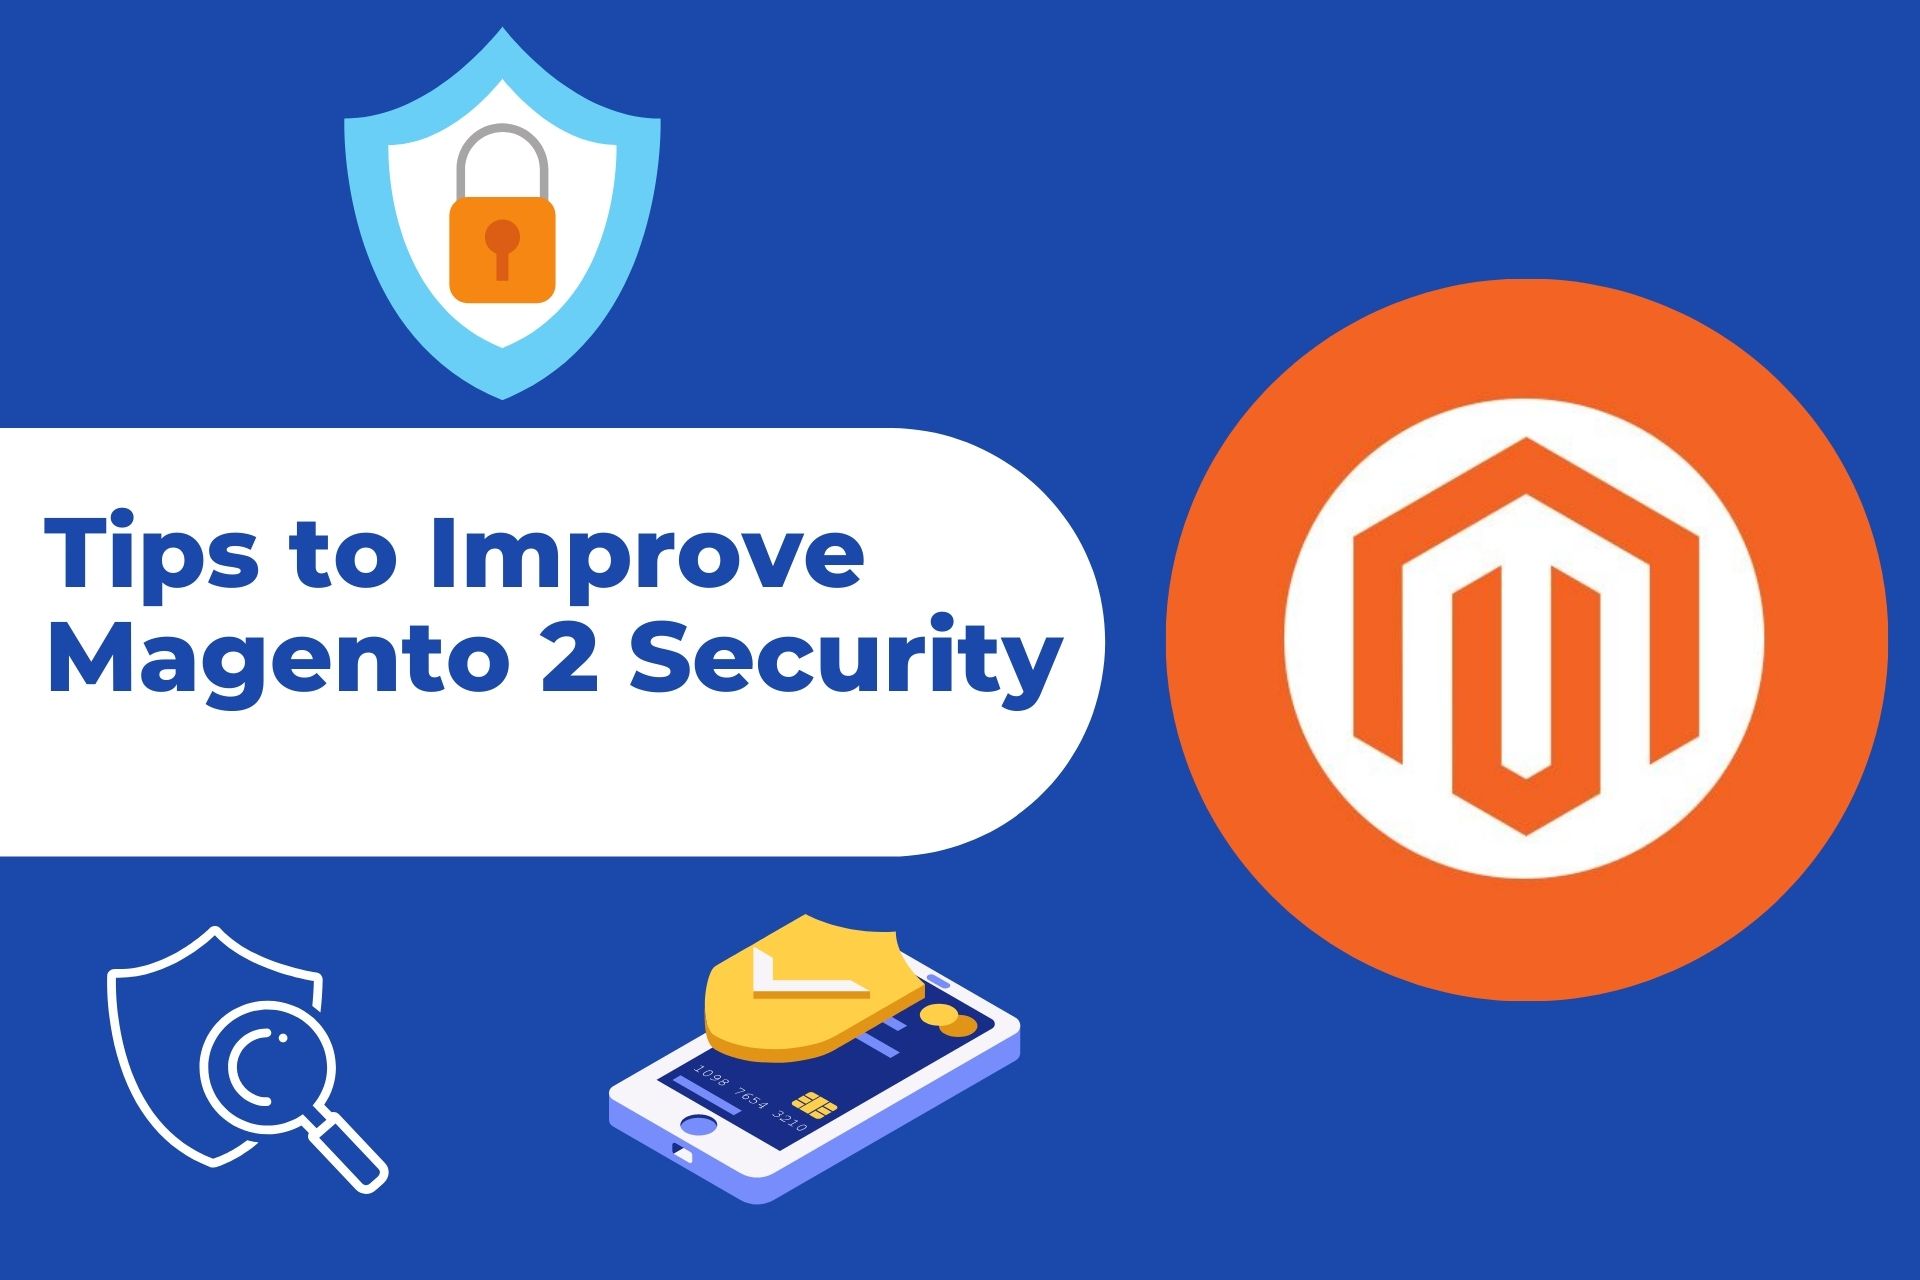 Tips to Improve Magento 2 Security